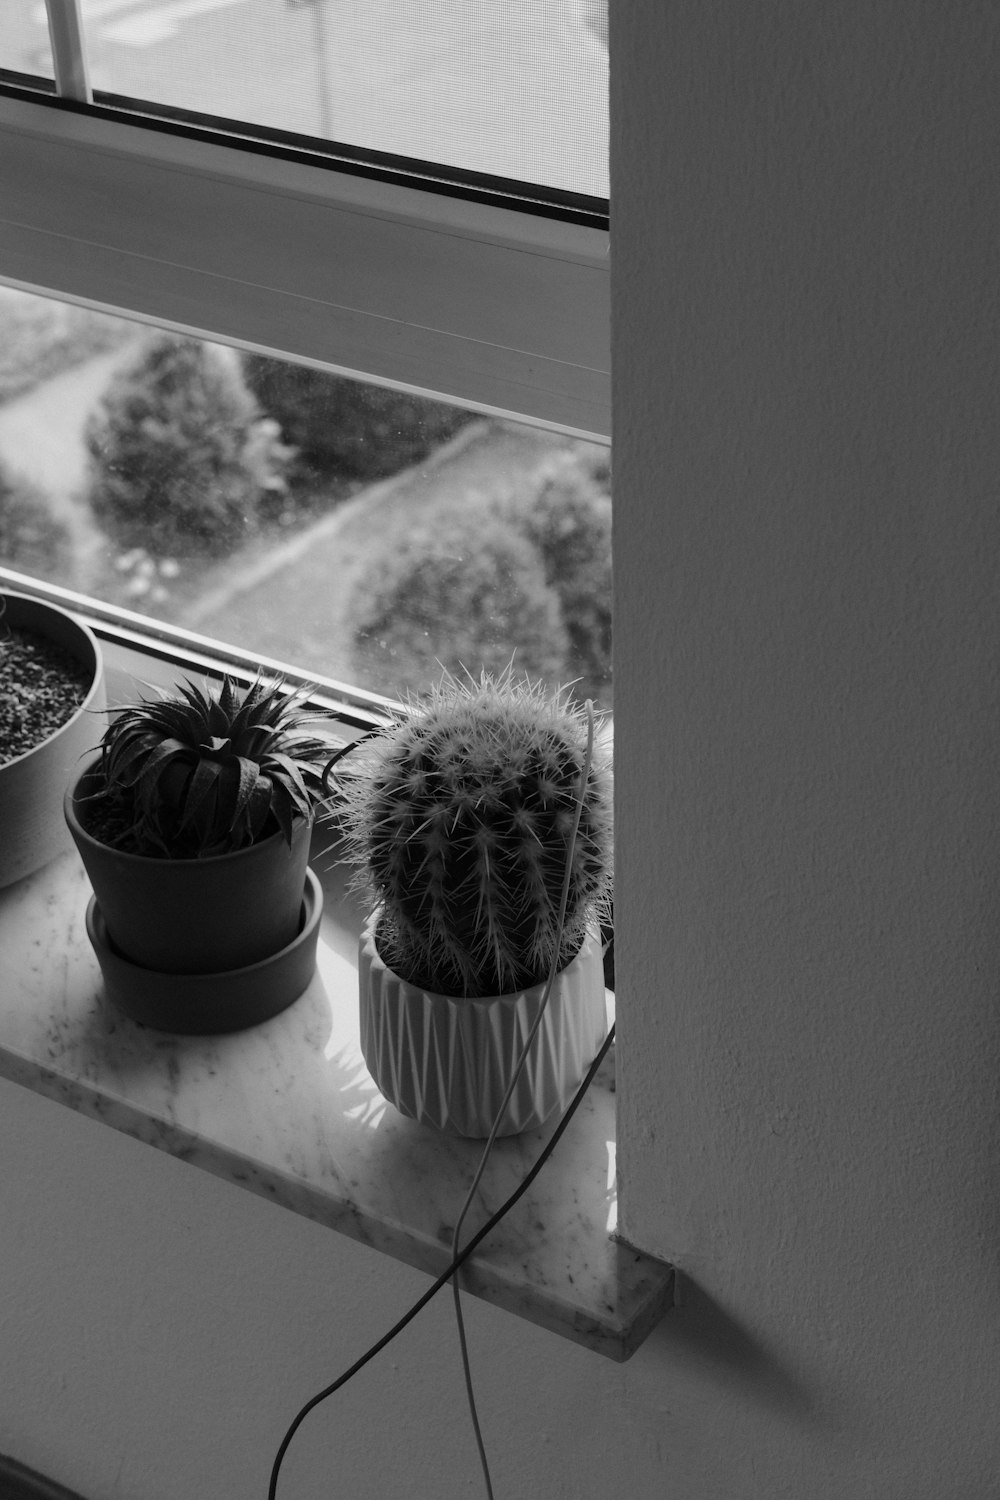 a window sill with three potted plants on it